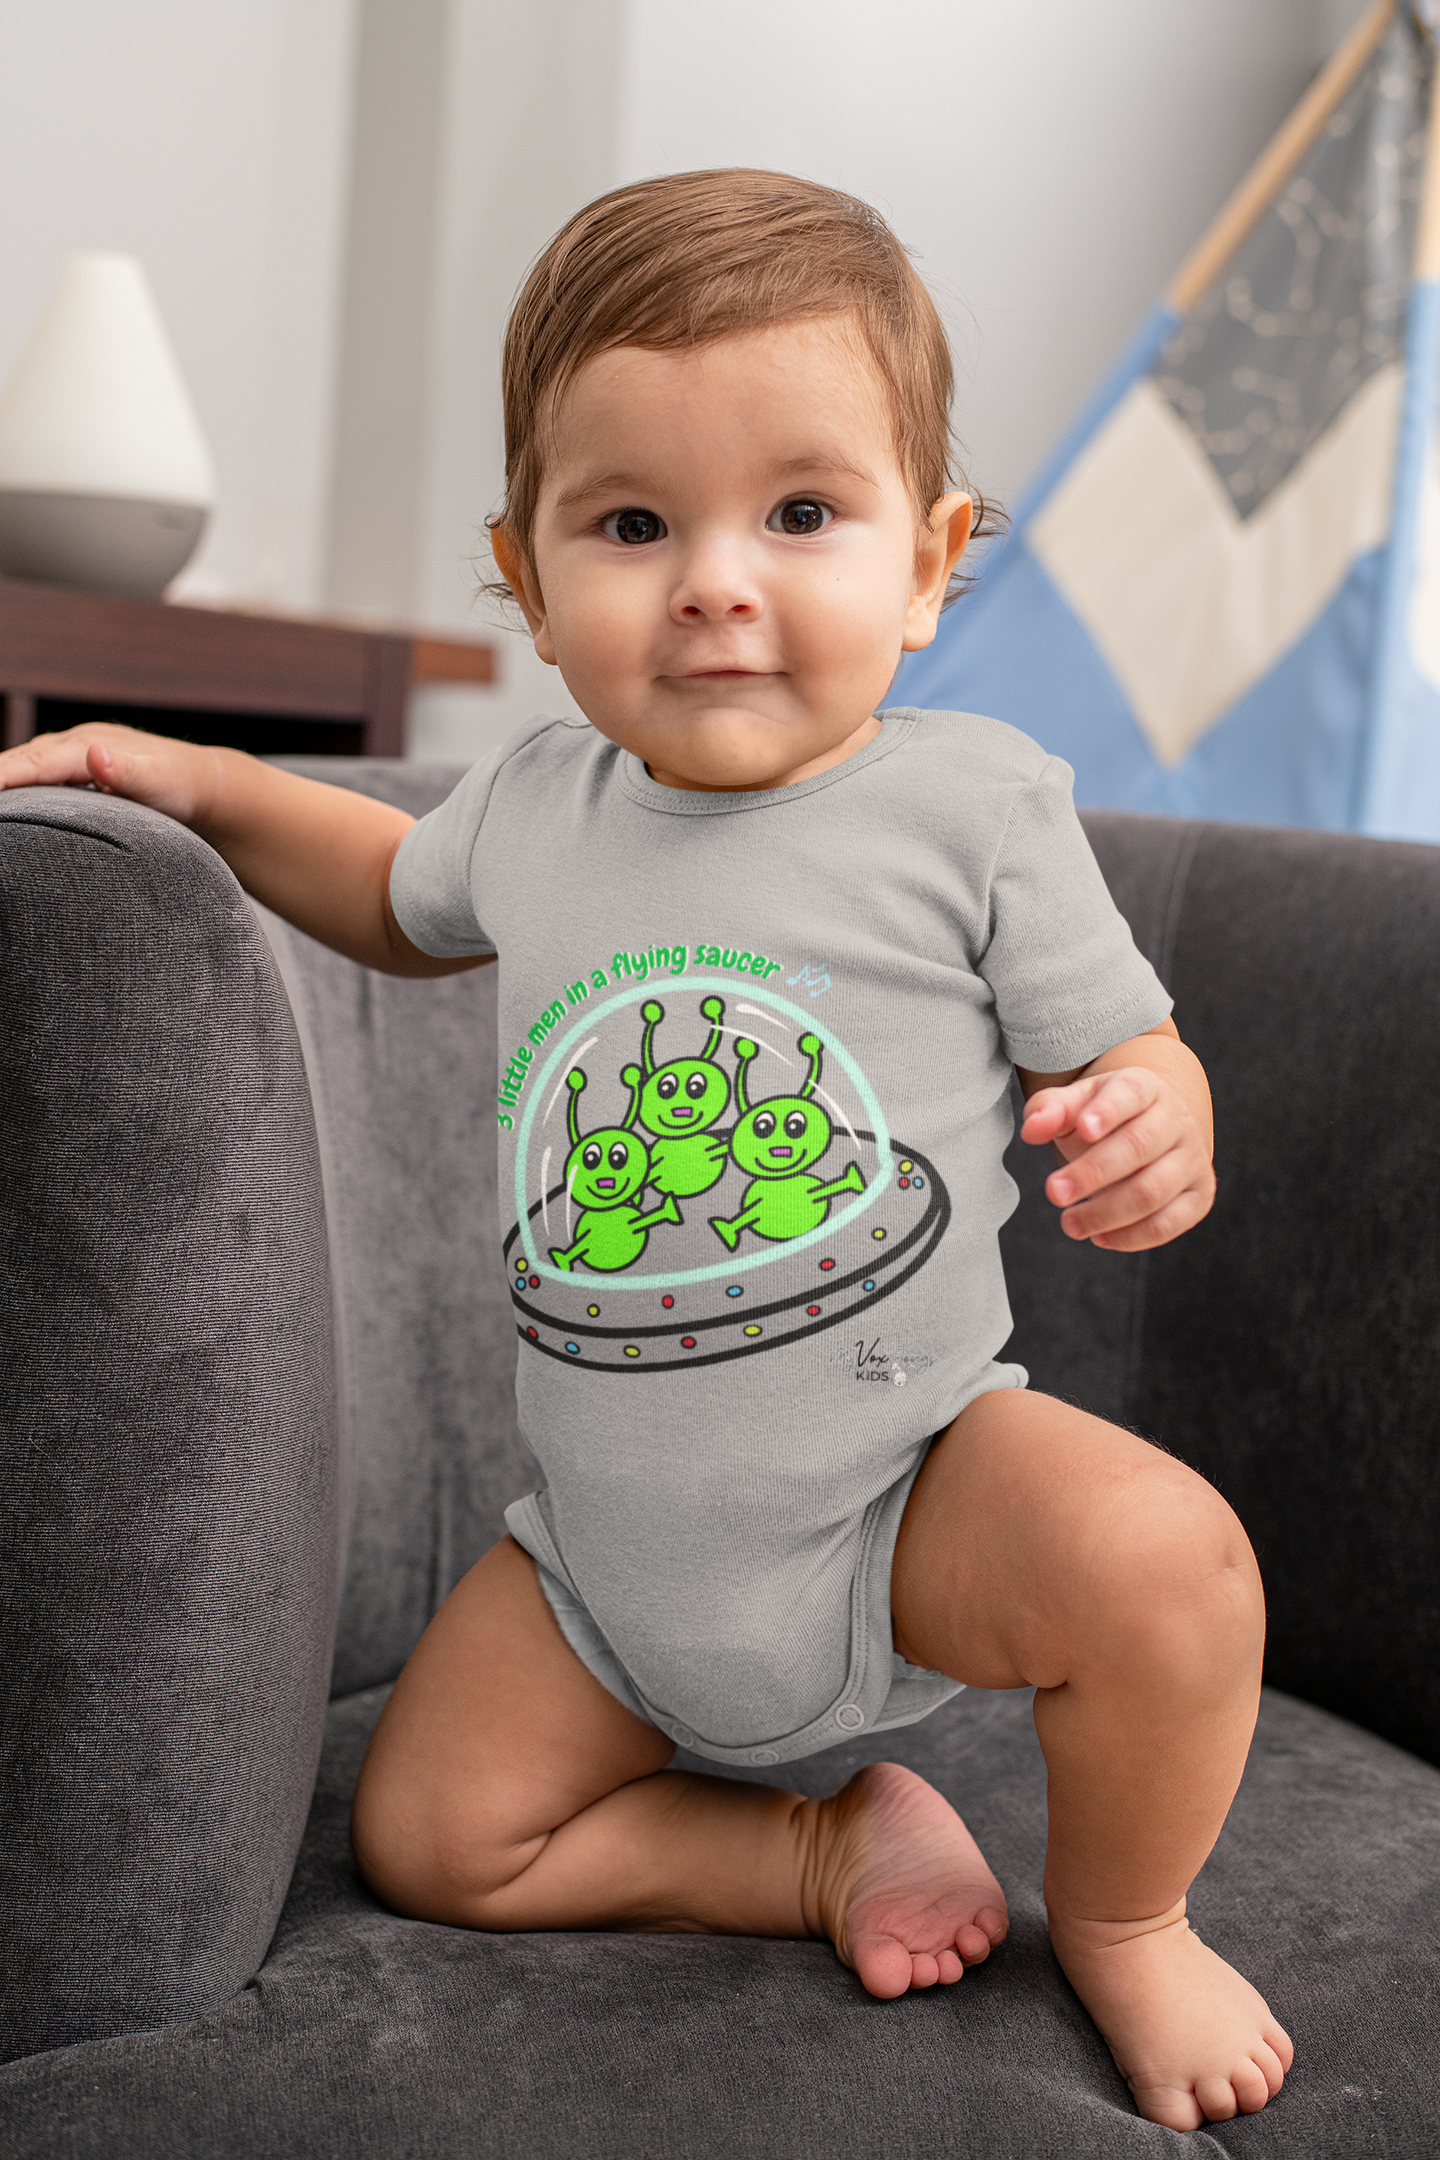 UFO Baby bodysuit, Cute Aliens baby & toddler Onesies, clothes for girls, boys, gender neutral gifts for baby showers, birthdays, Christmas